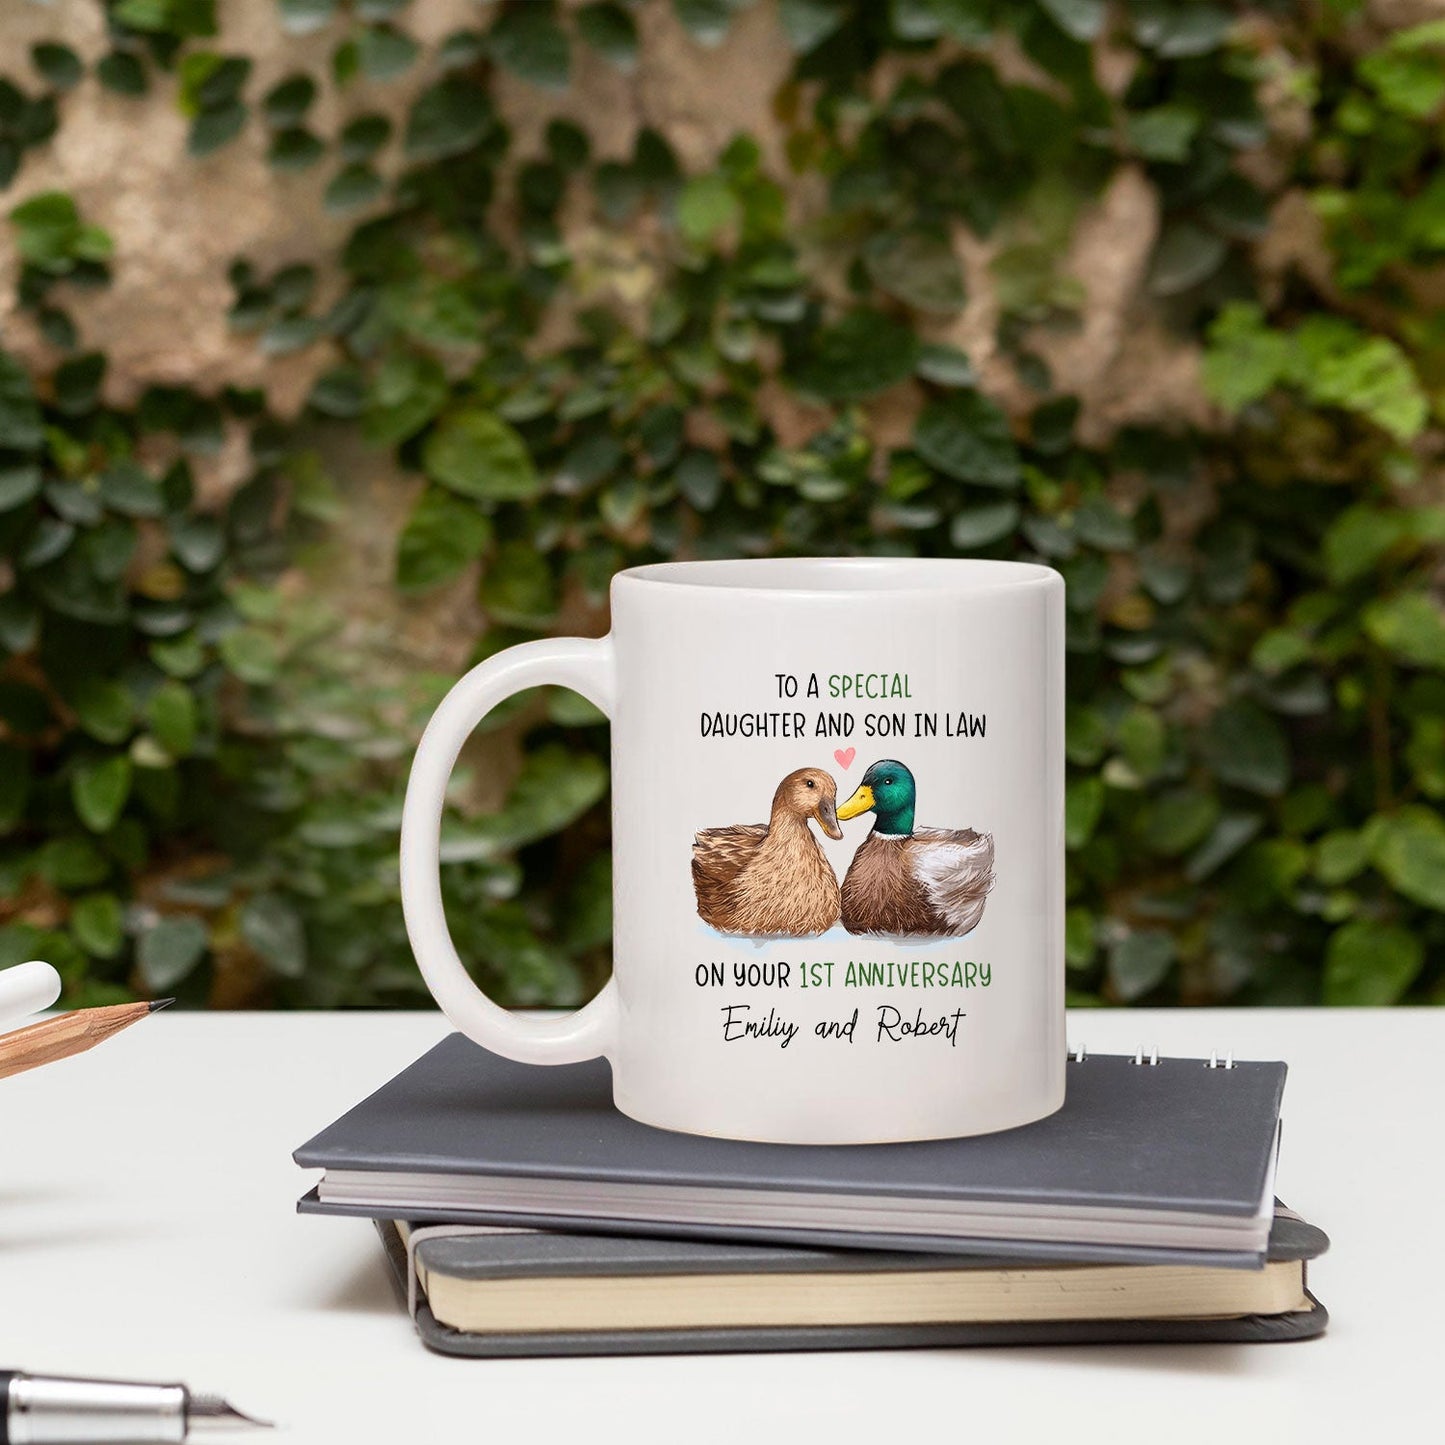 To A Special Daughter And Son In Law - Personalized Anniversary gift for Daughter and Son In Law - Custom Mug - MyMindfulGifts